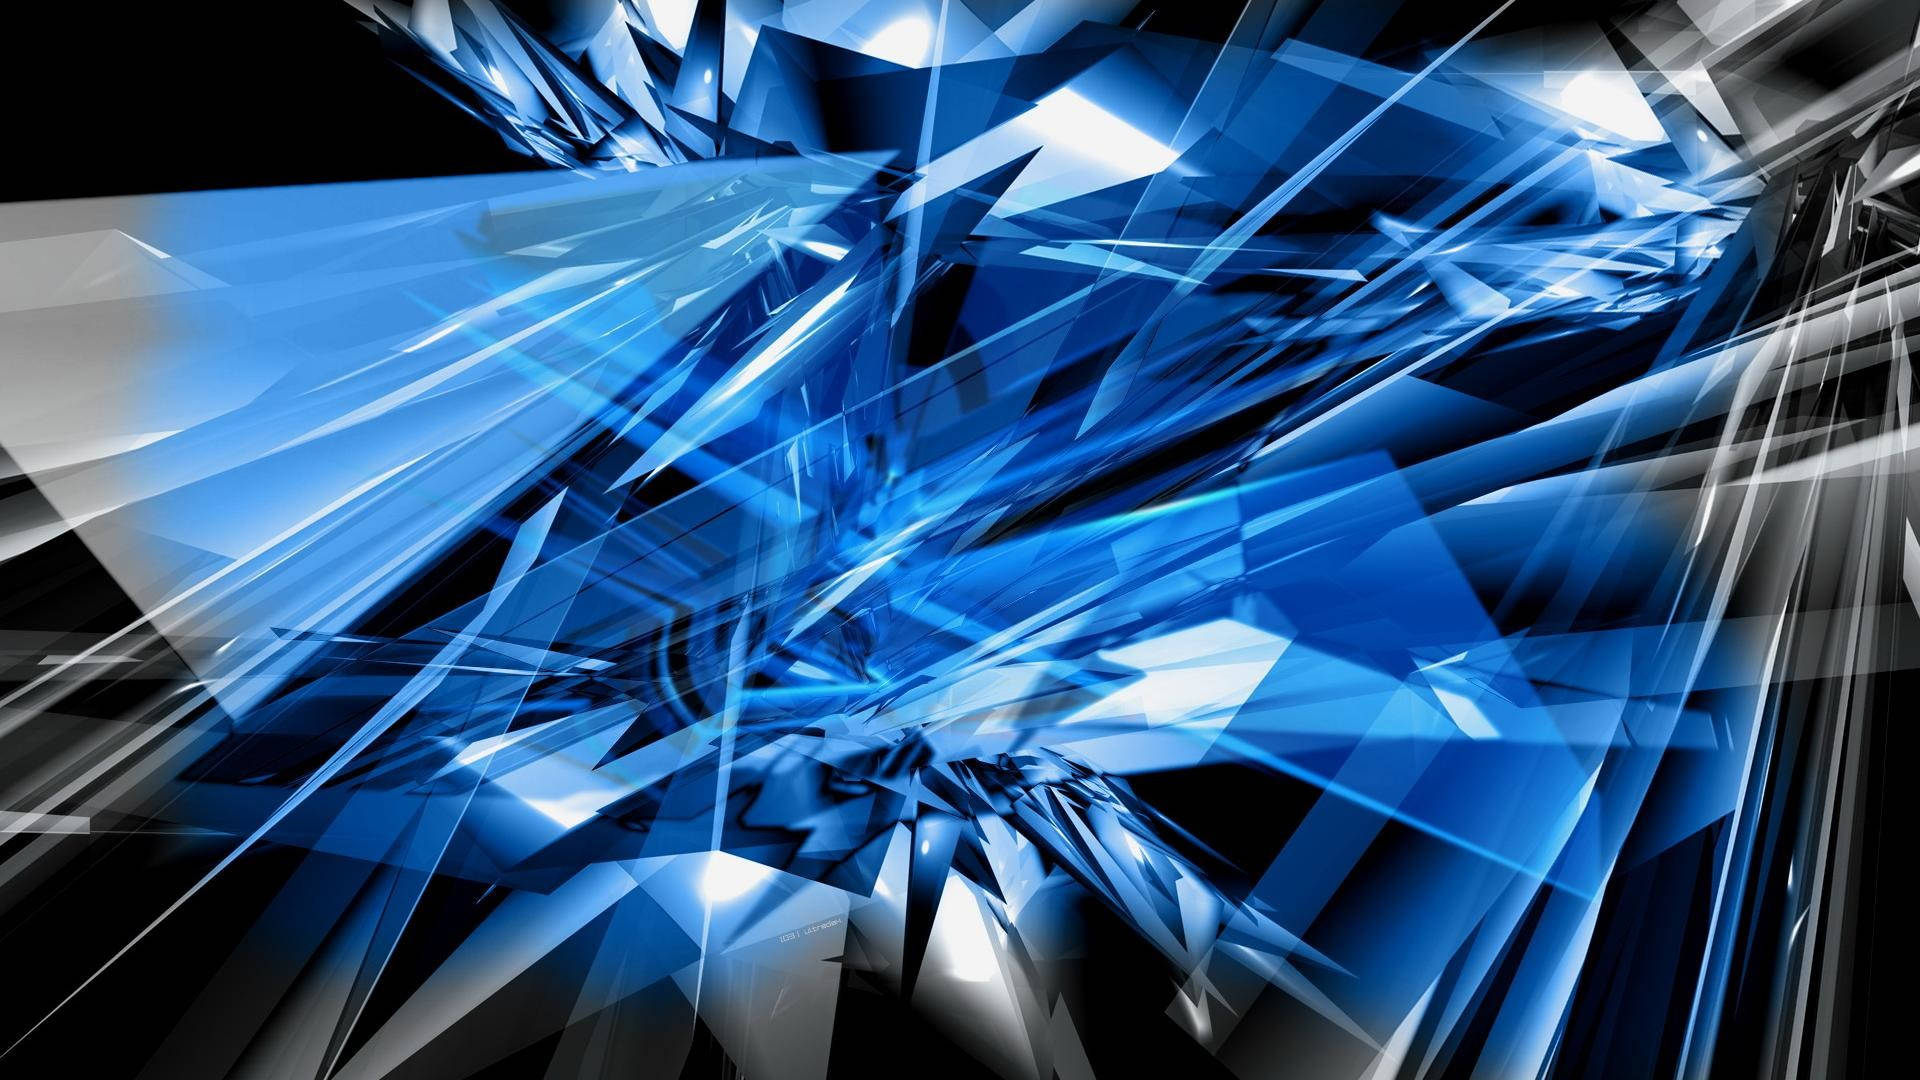 Cool Blue Glass Shards Background